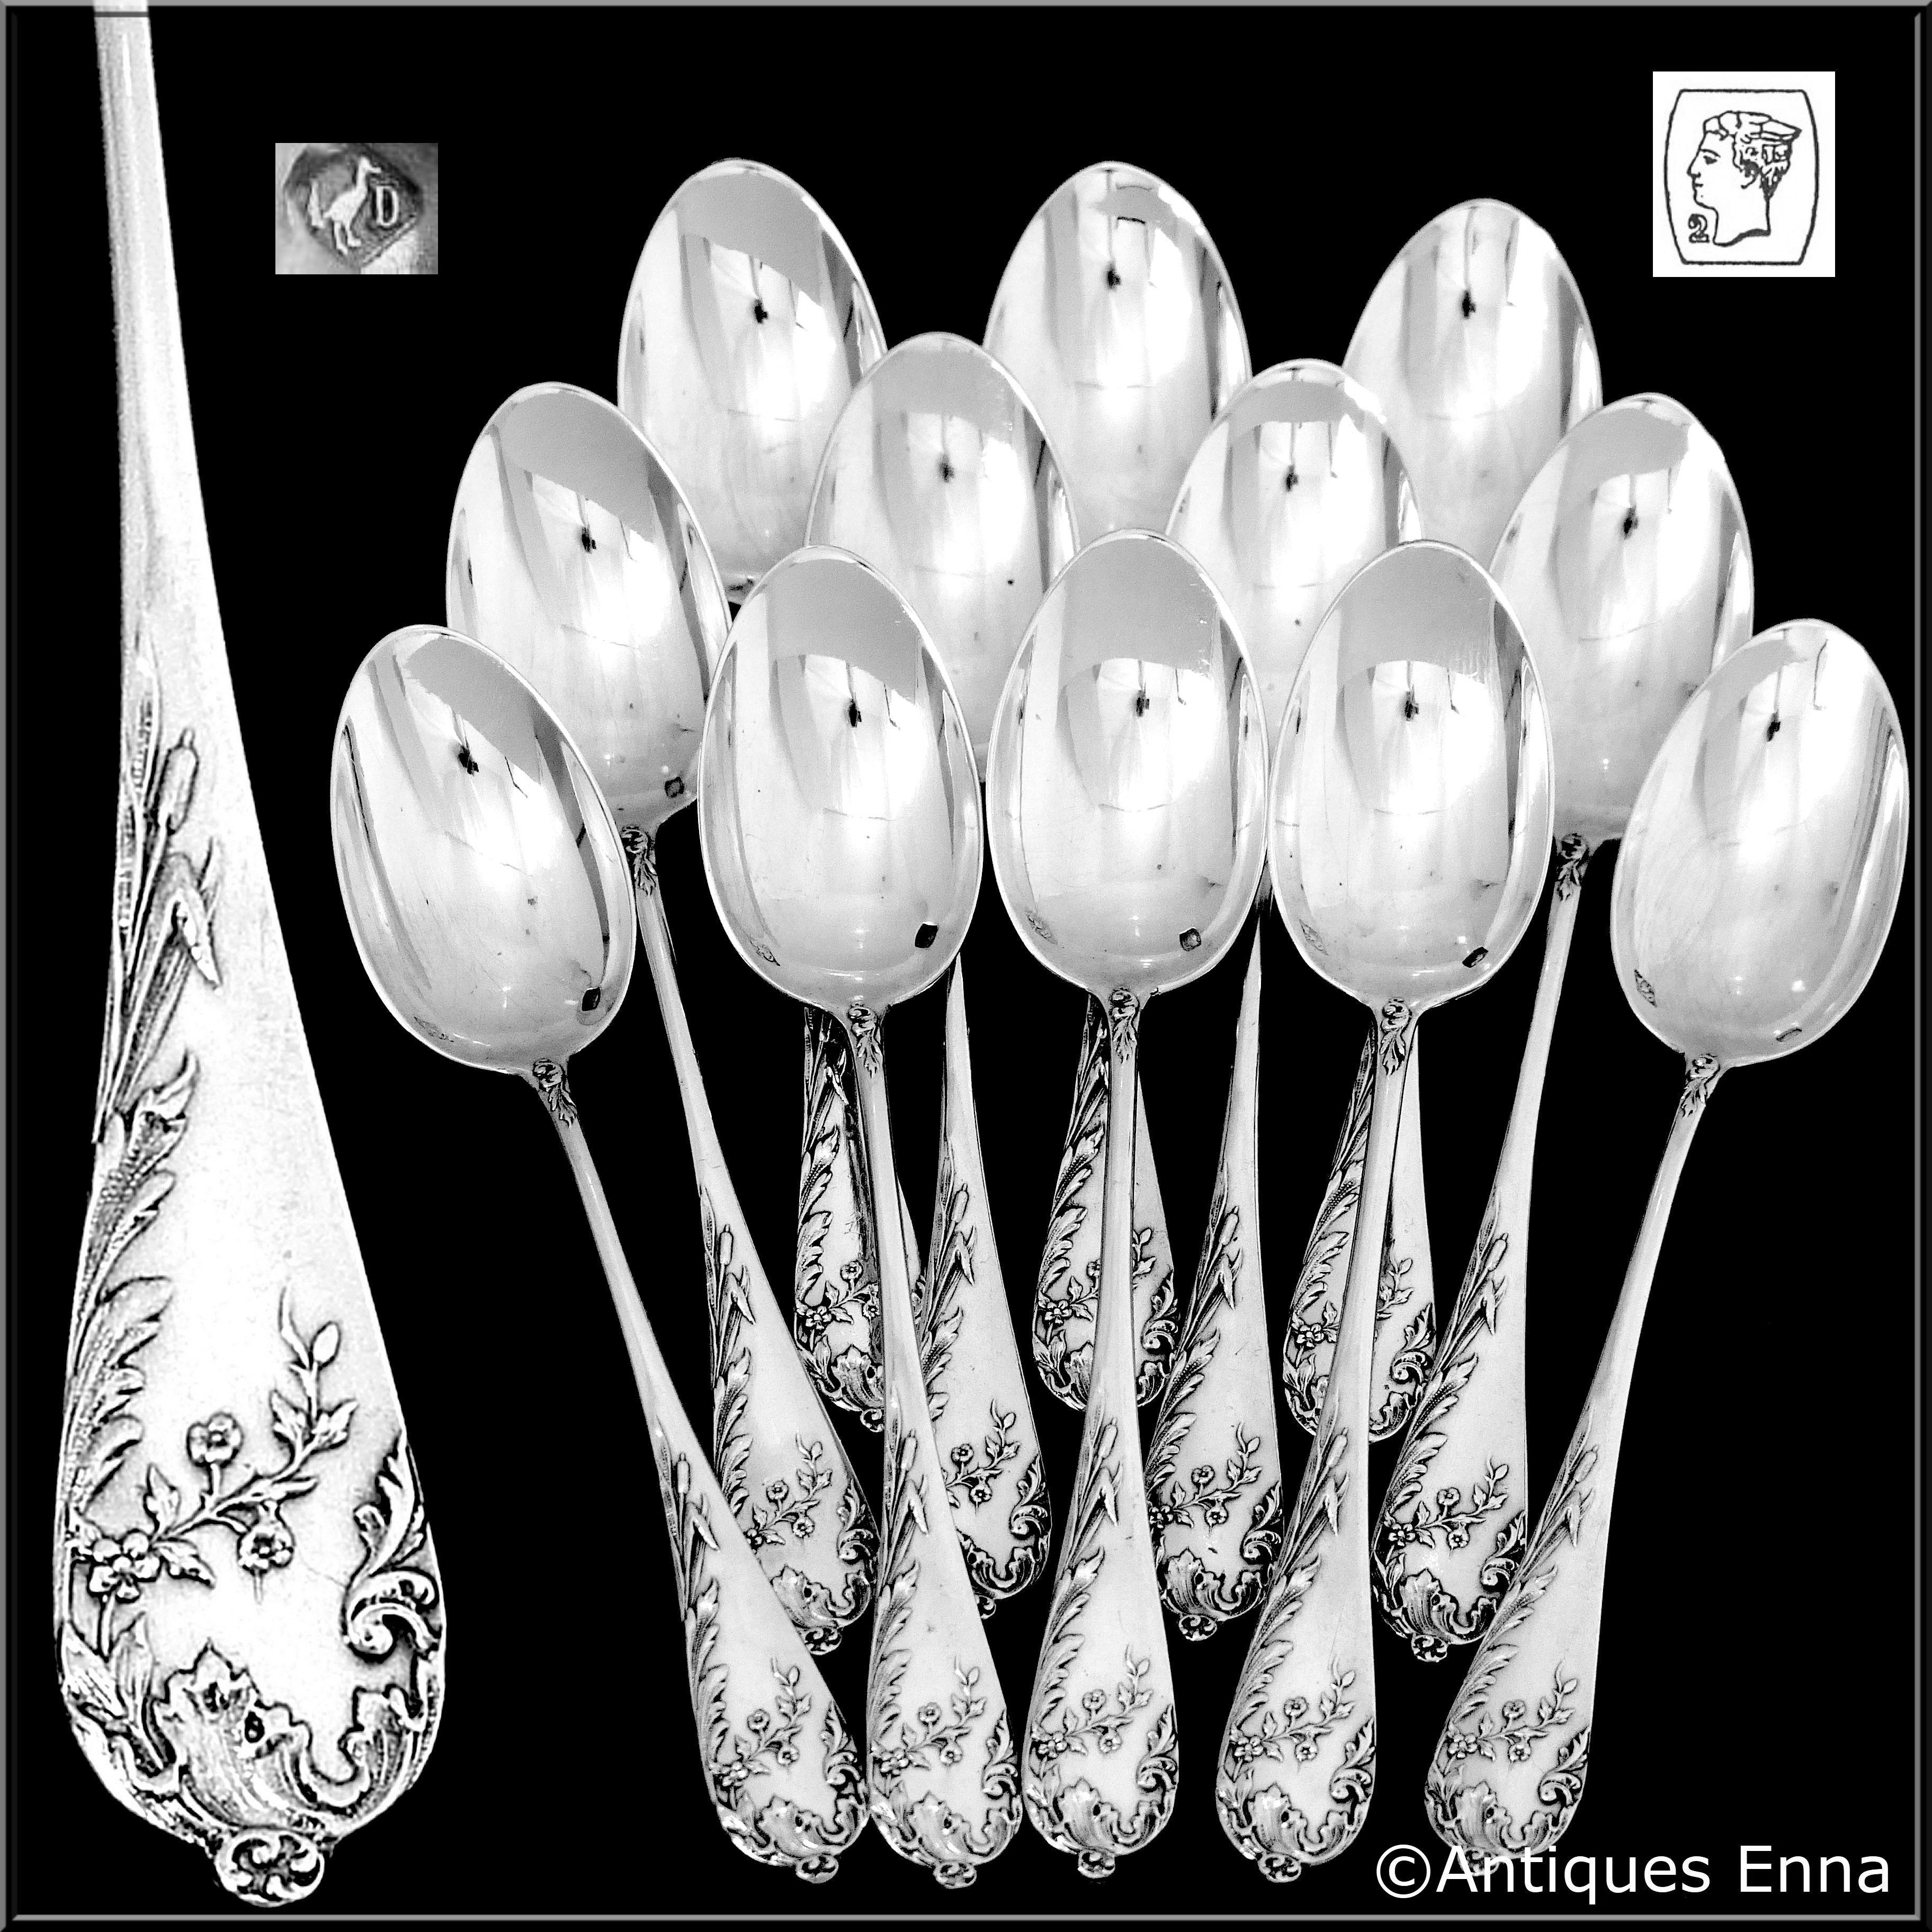 Head of Mercure 2nd titre for 800/1000 French sterling silver guarantee.

Antique French sterling silver tea coffee spoons set twelve pieces with fantastic reed decoration in the Art Nouveau style. No monograms. Gorgeous model of the prestigious